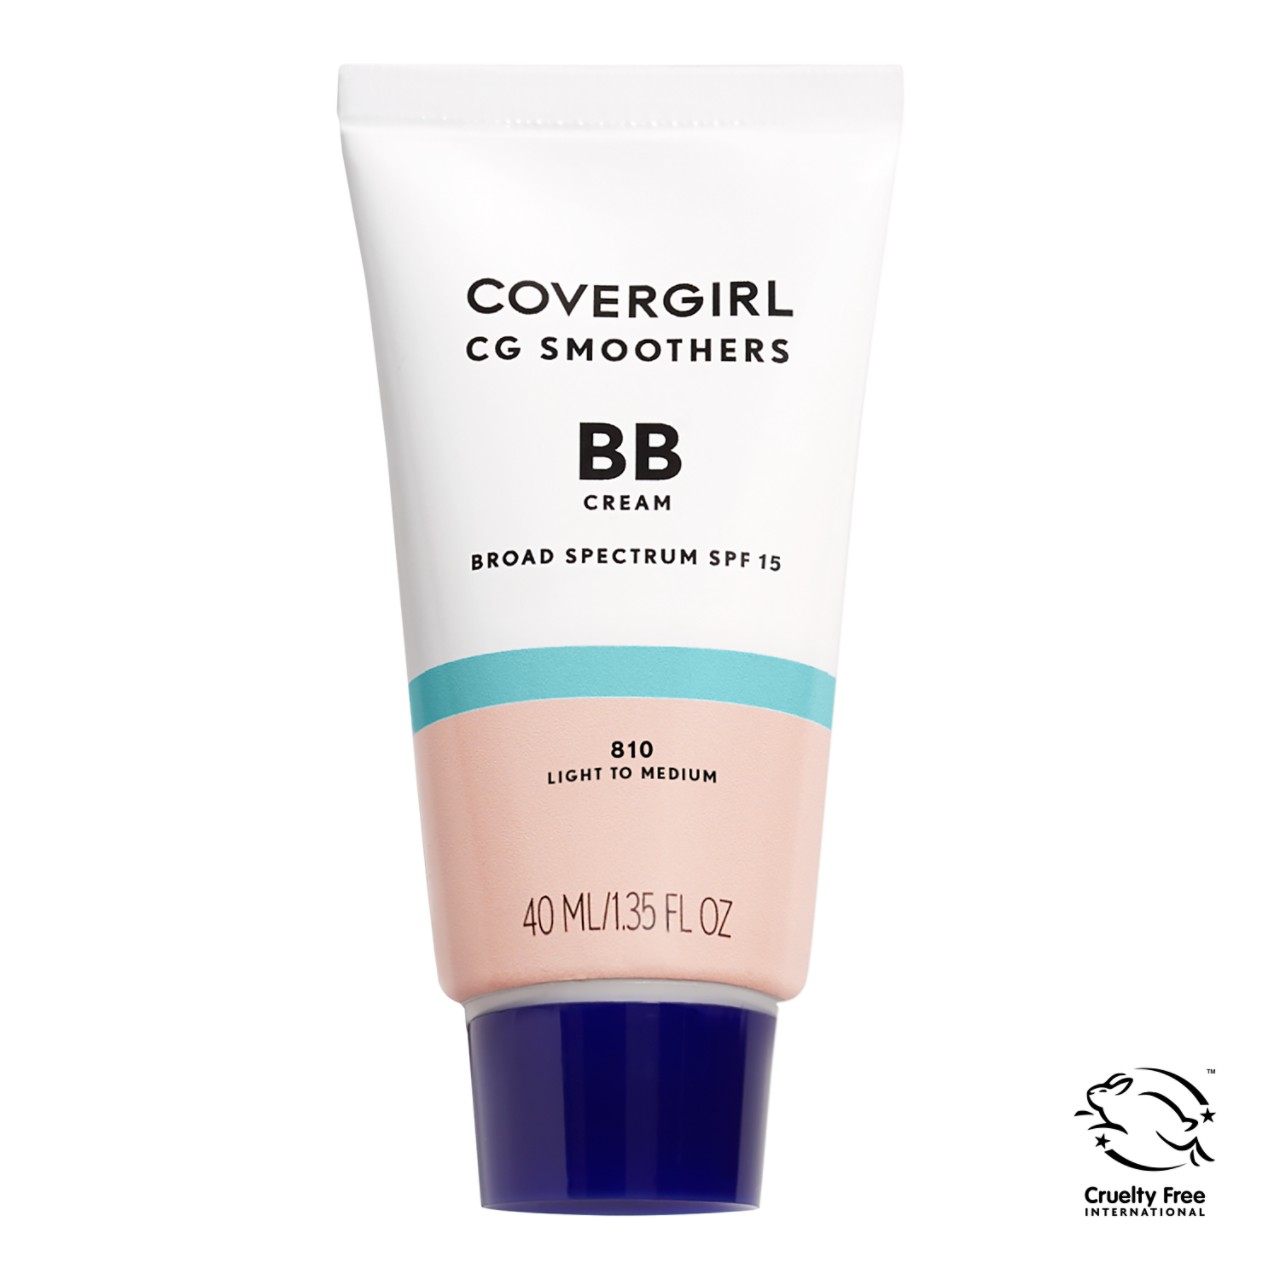 COVERGIRL Smoothers BB Cream with SPF 21, 805 Fair to Light, 1.35 fl oz - image 1 of 10